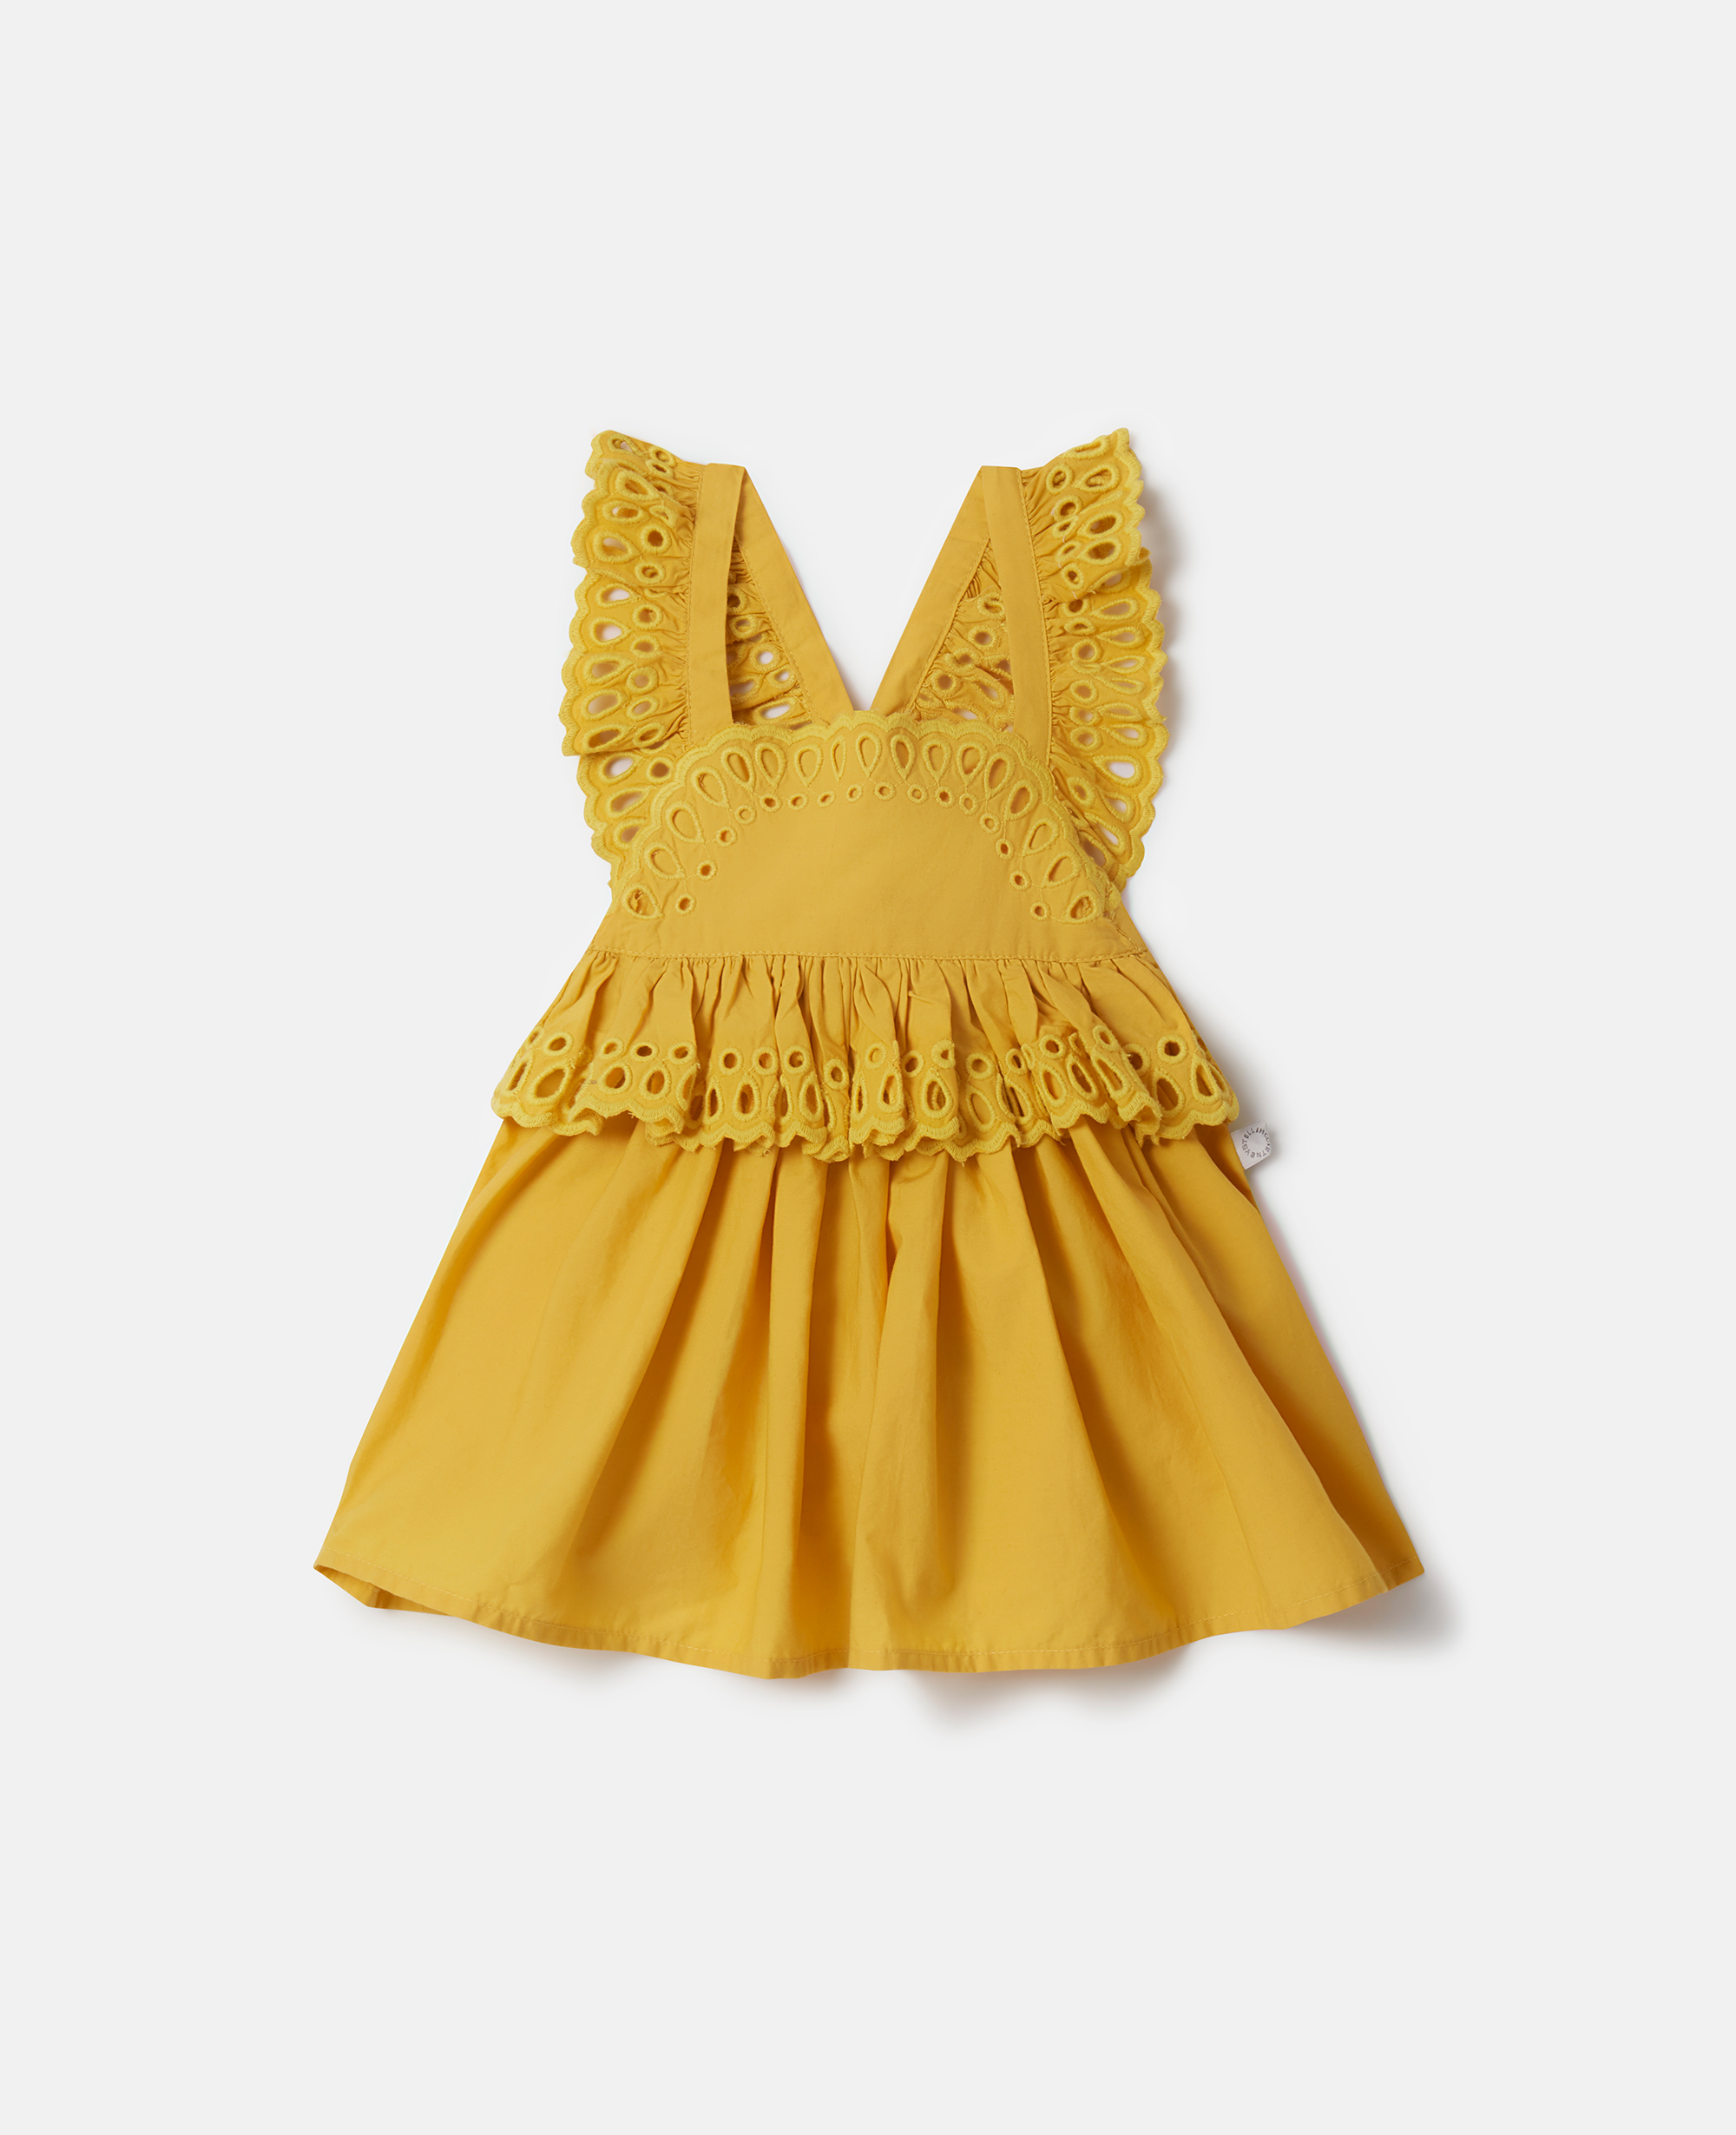 stella mccartney - robe chasuble à broderie anglaise, femme, jaune, taille: 12m